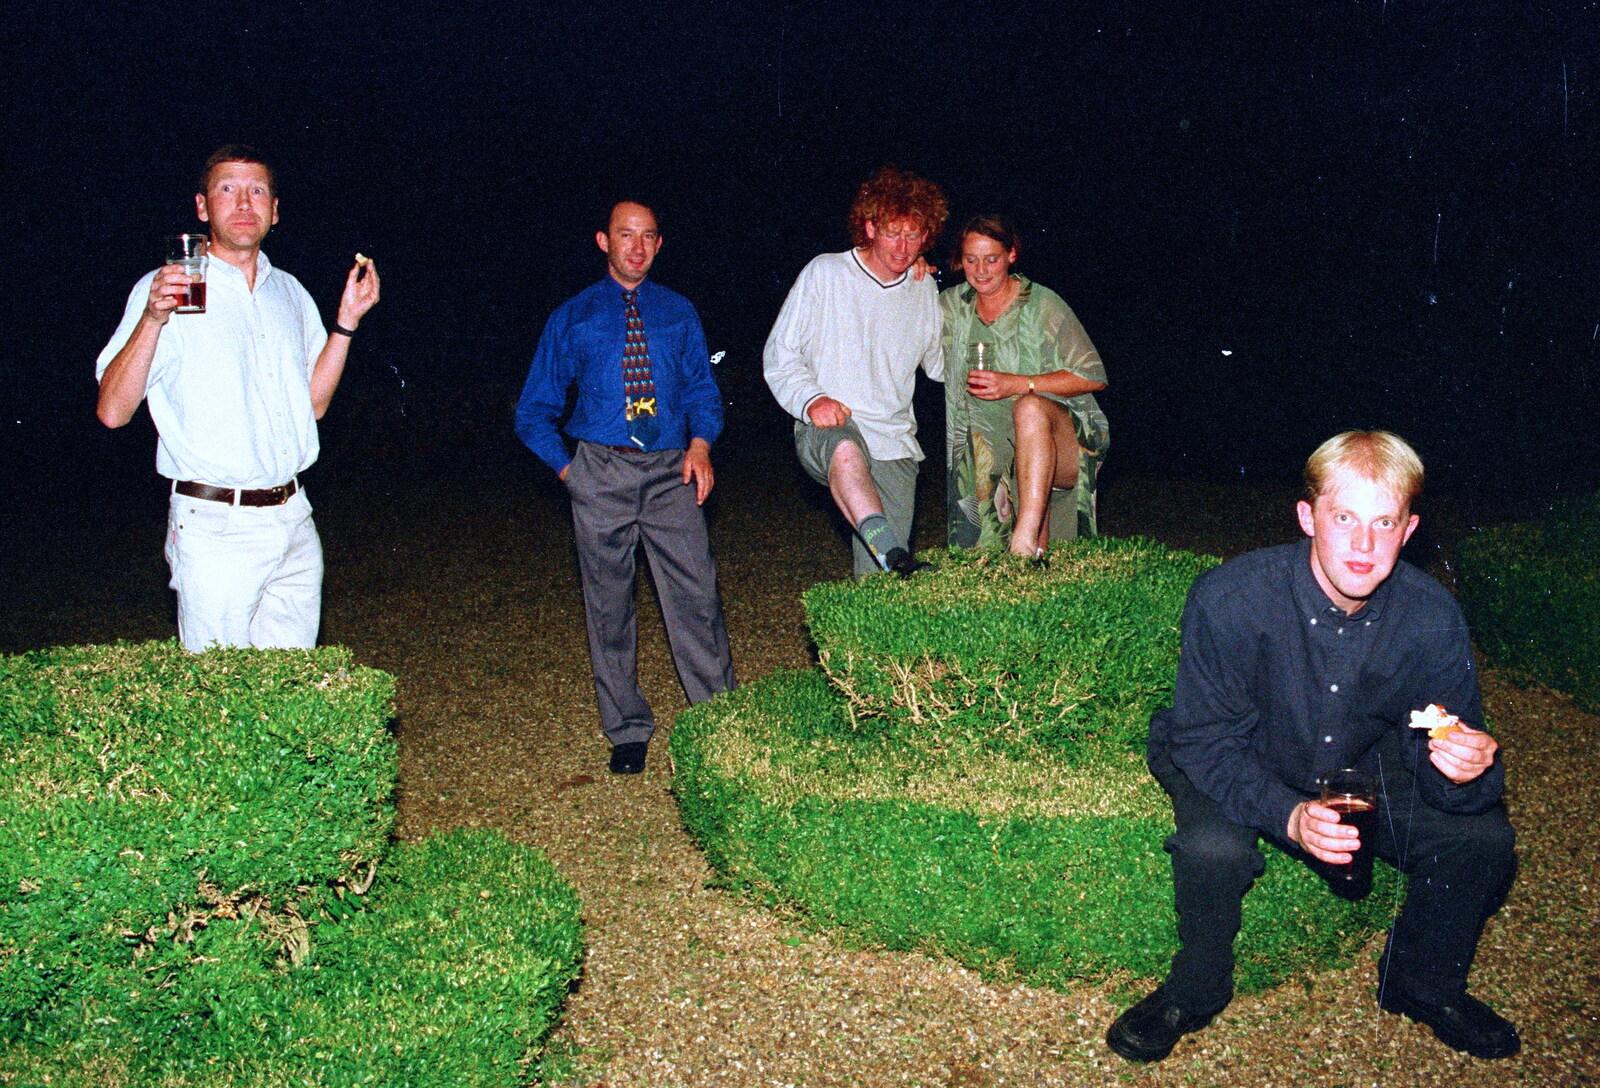 Paul sits on a small topiary hedge from Helen and Neil's Wedding, The Oaksmere, Brome, Suffolk - 4th August 2000